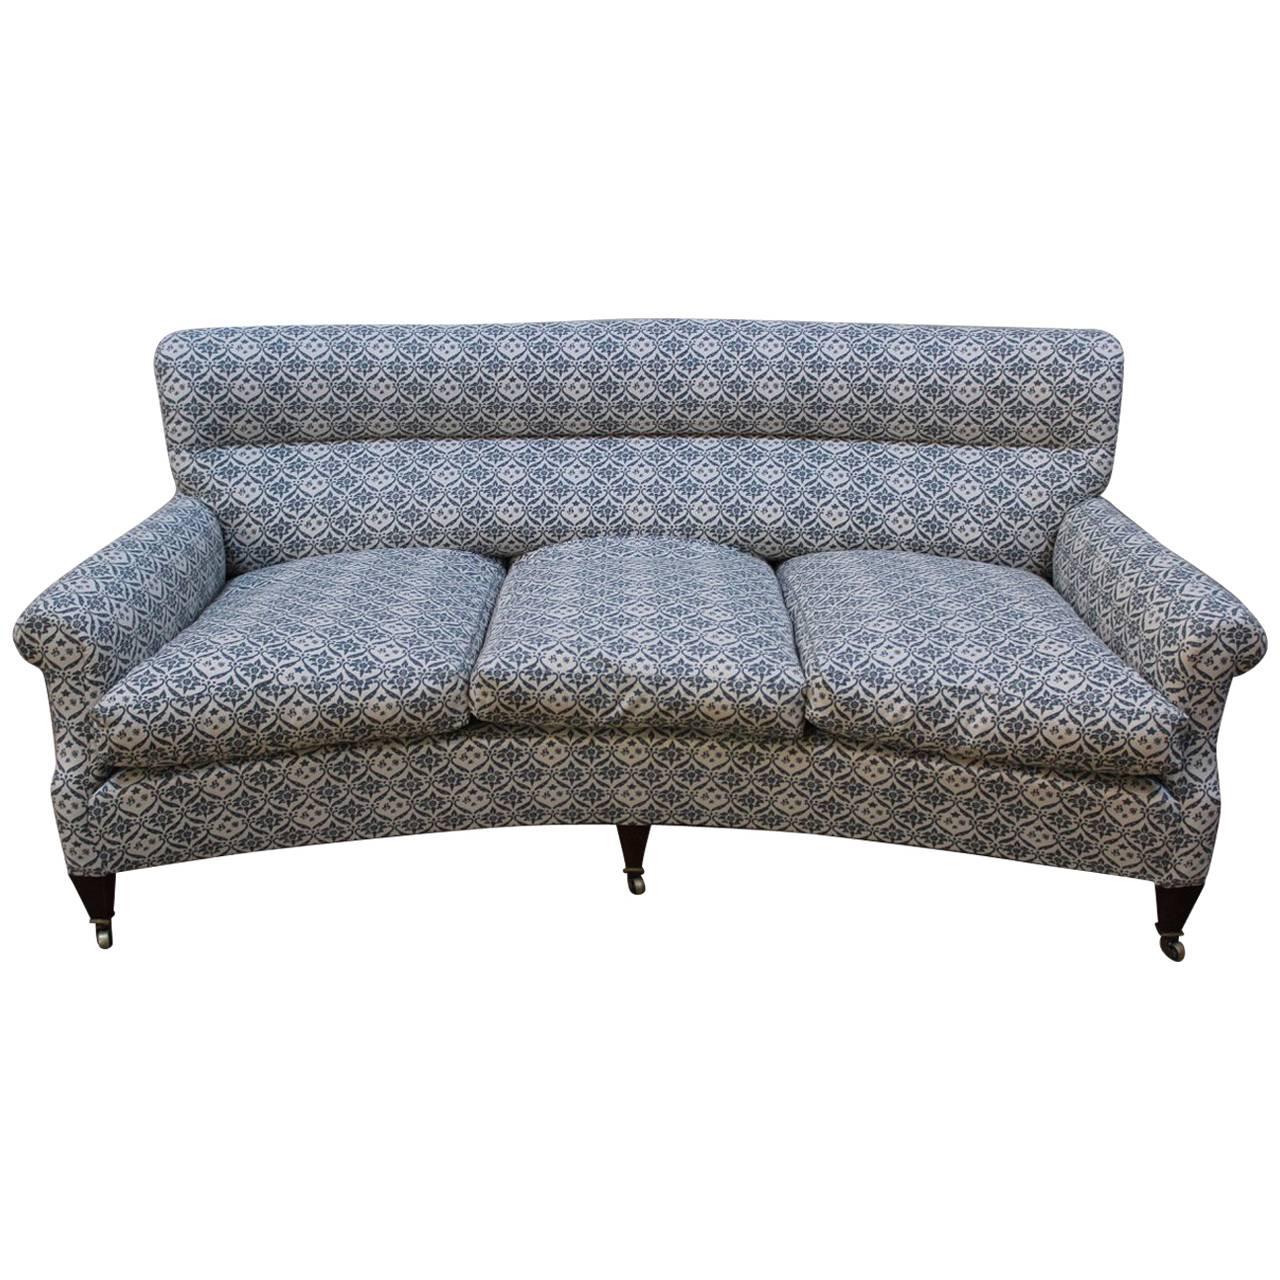 1950s English Country House Curved Sofa by Howard and Sons